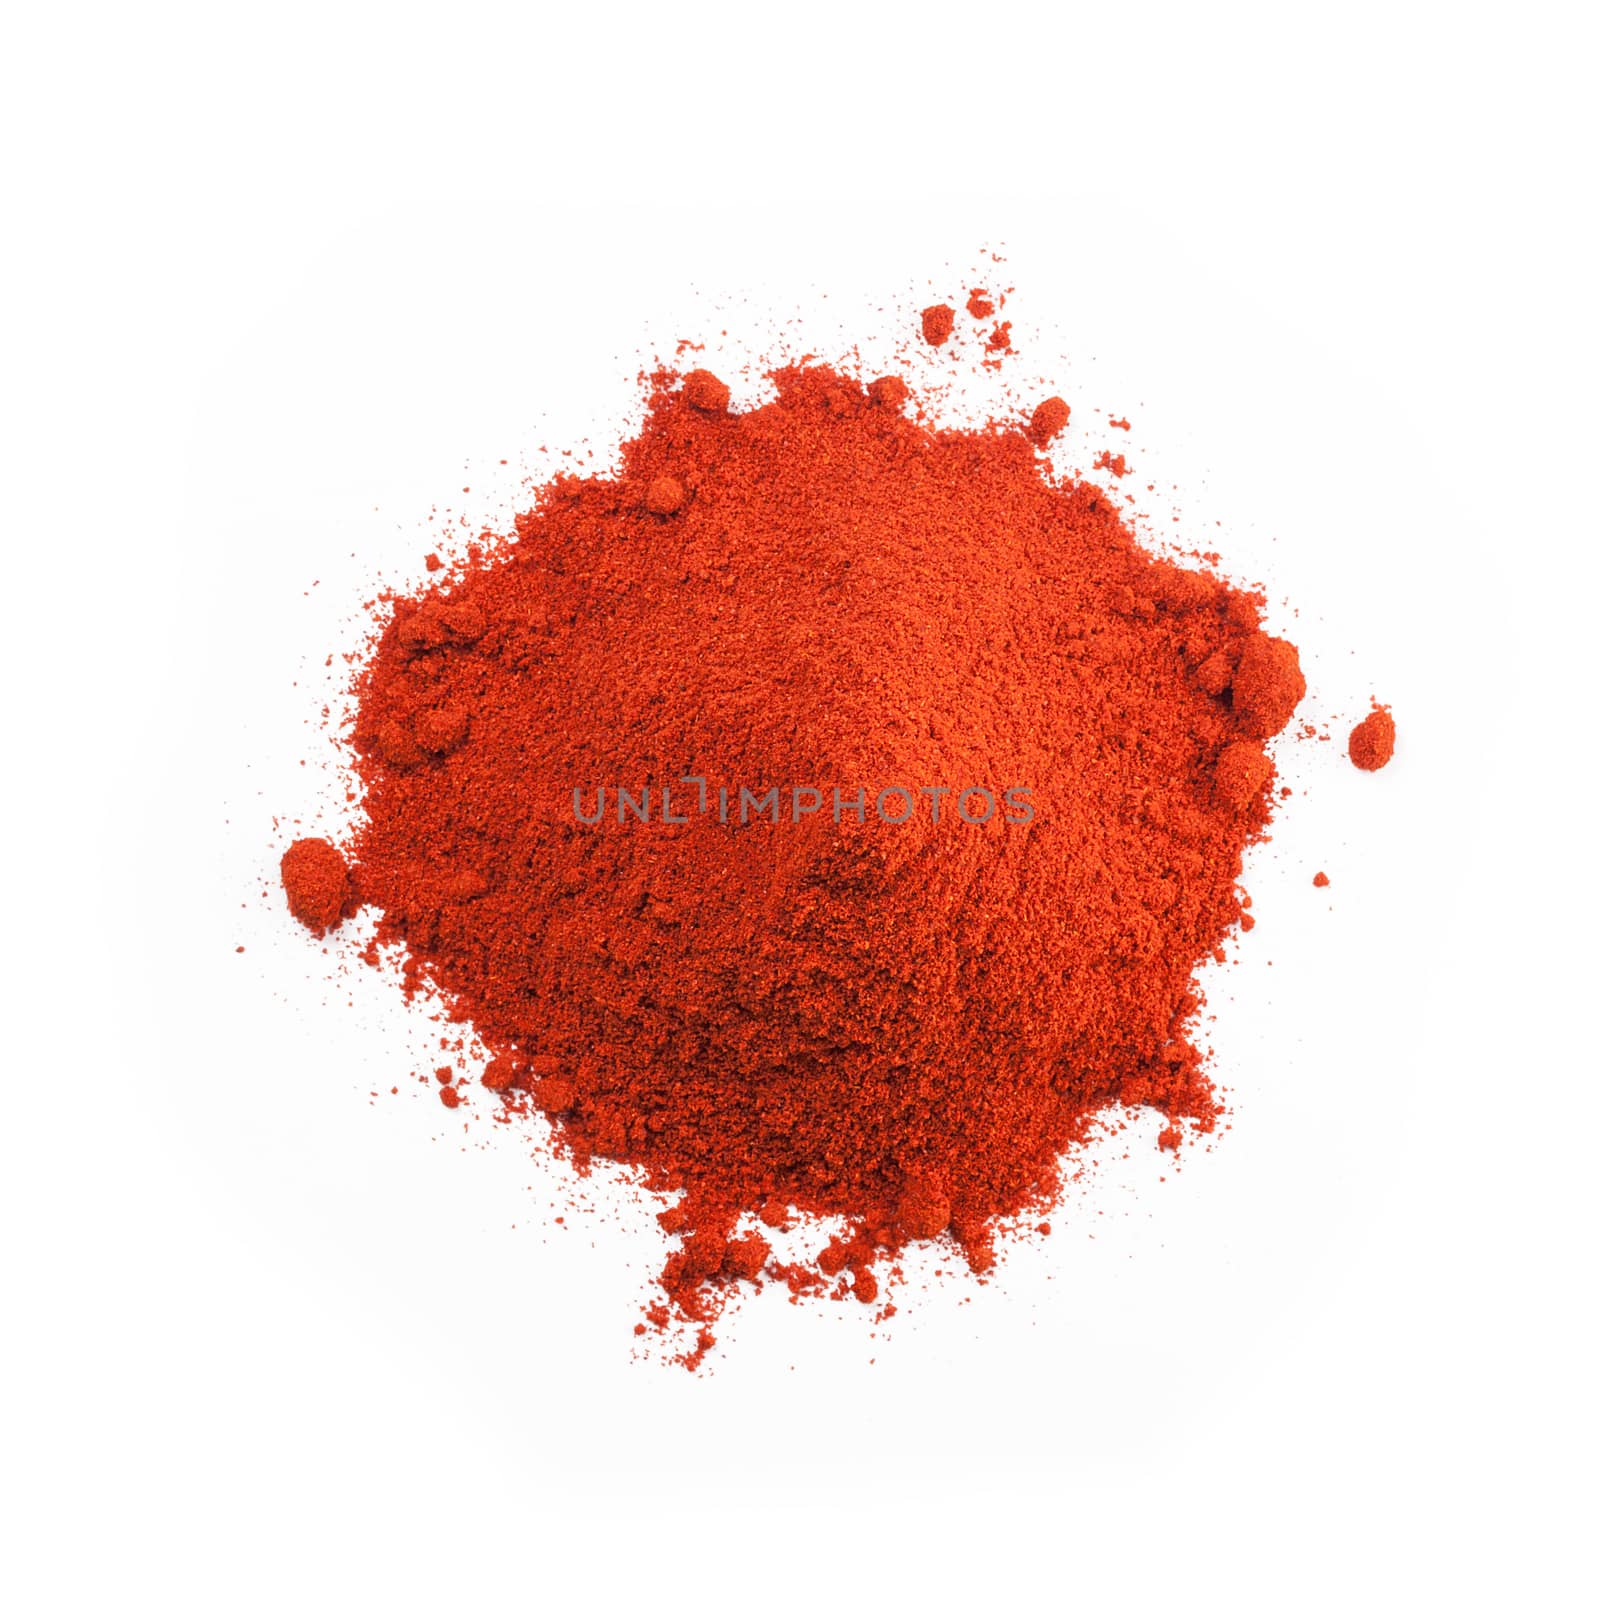 Powdered dried red pepper, isolated over white